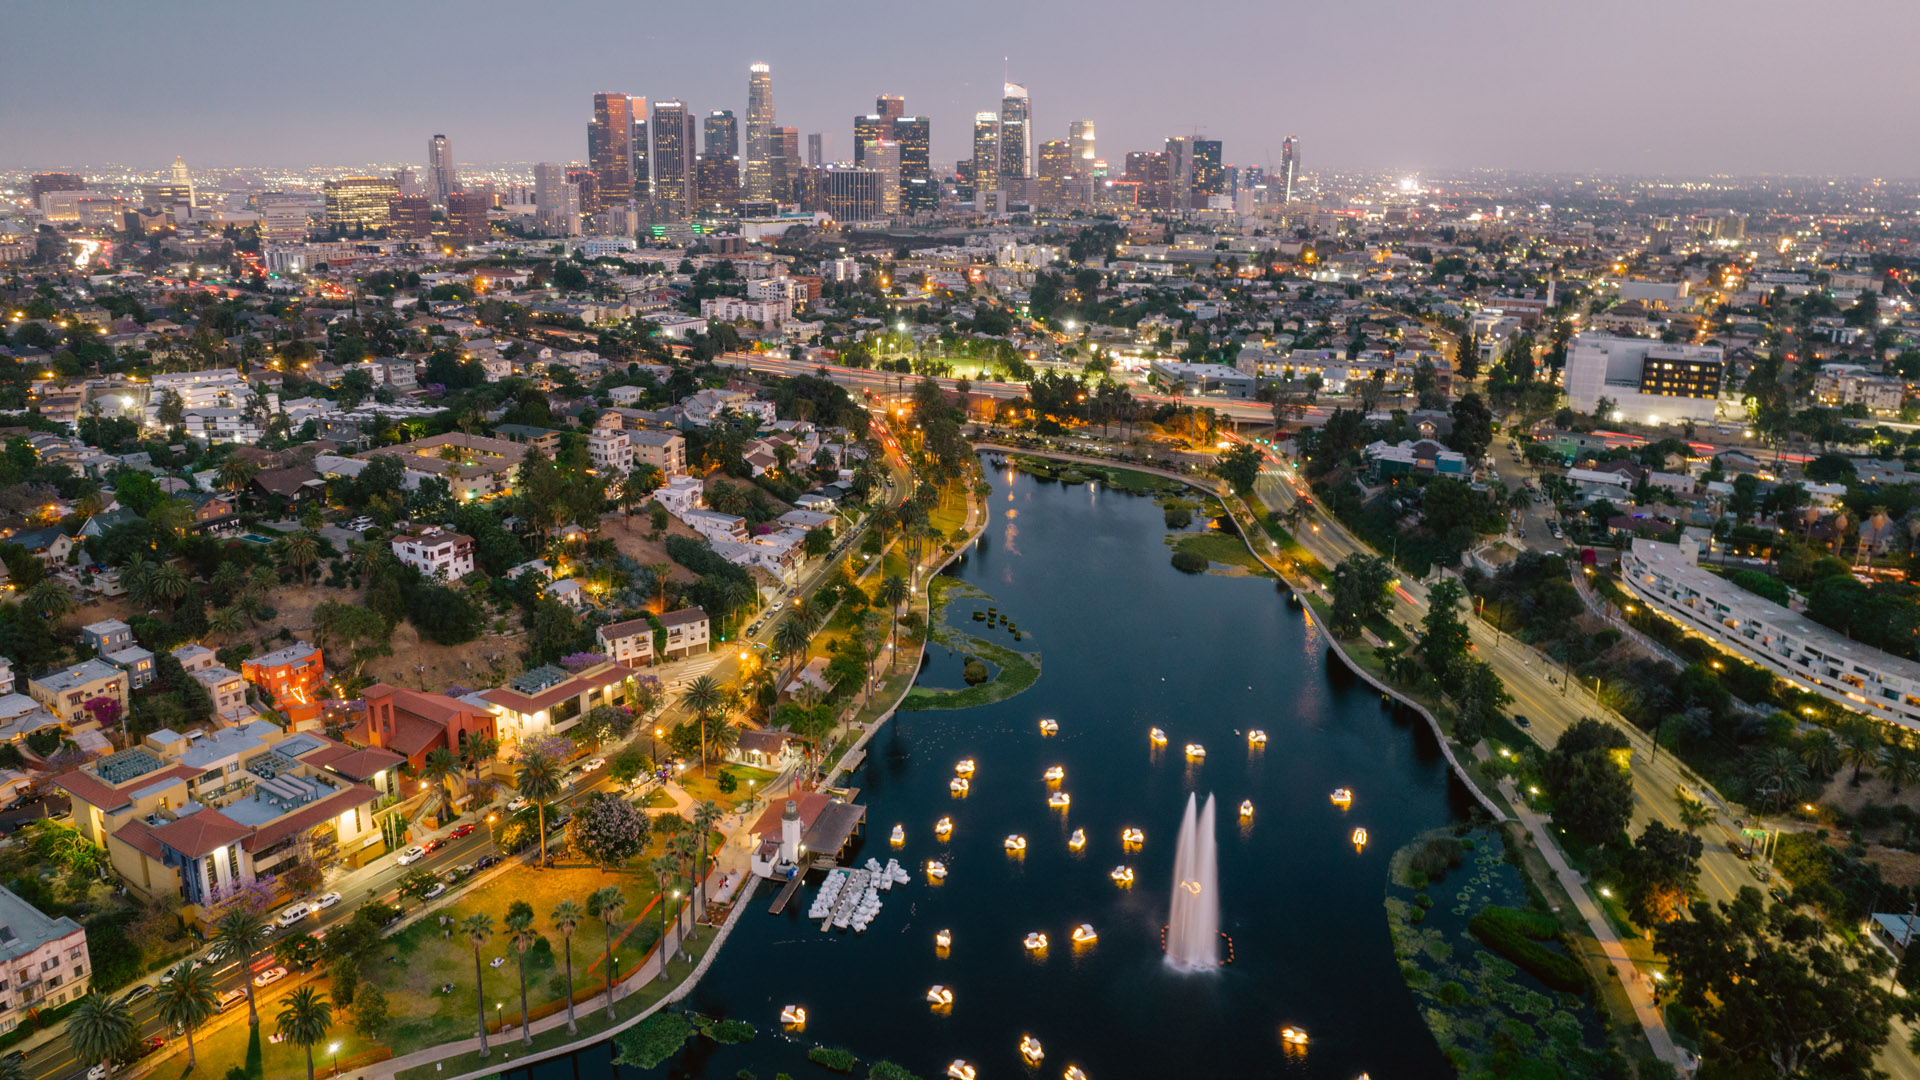 Los Angeles skyline from Echo Park Lake